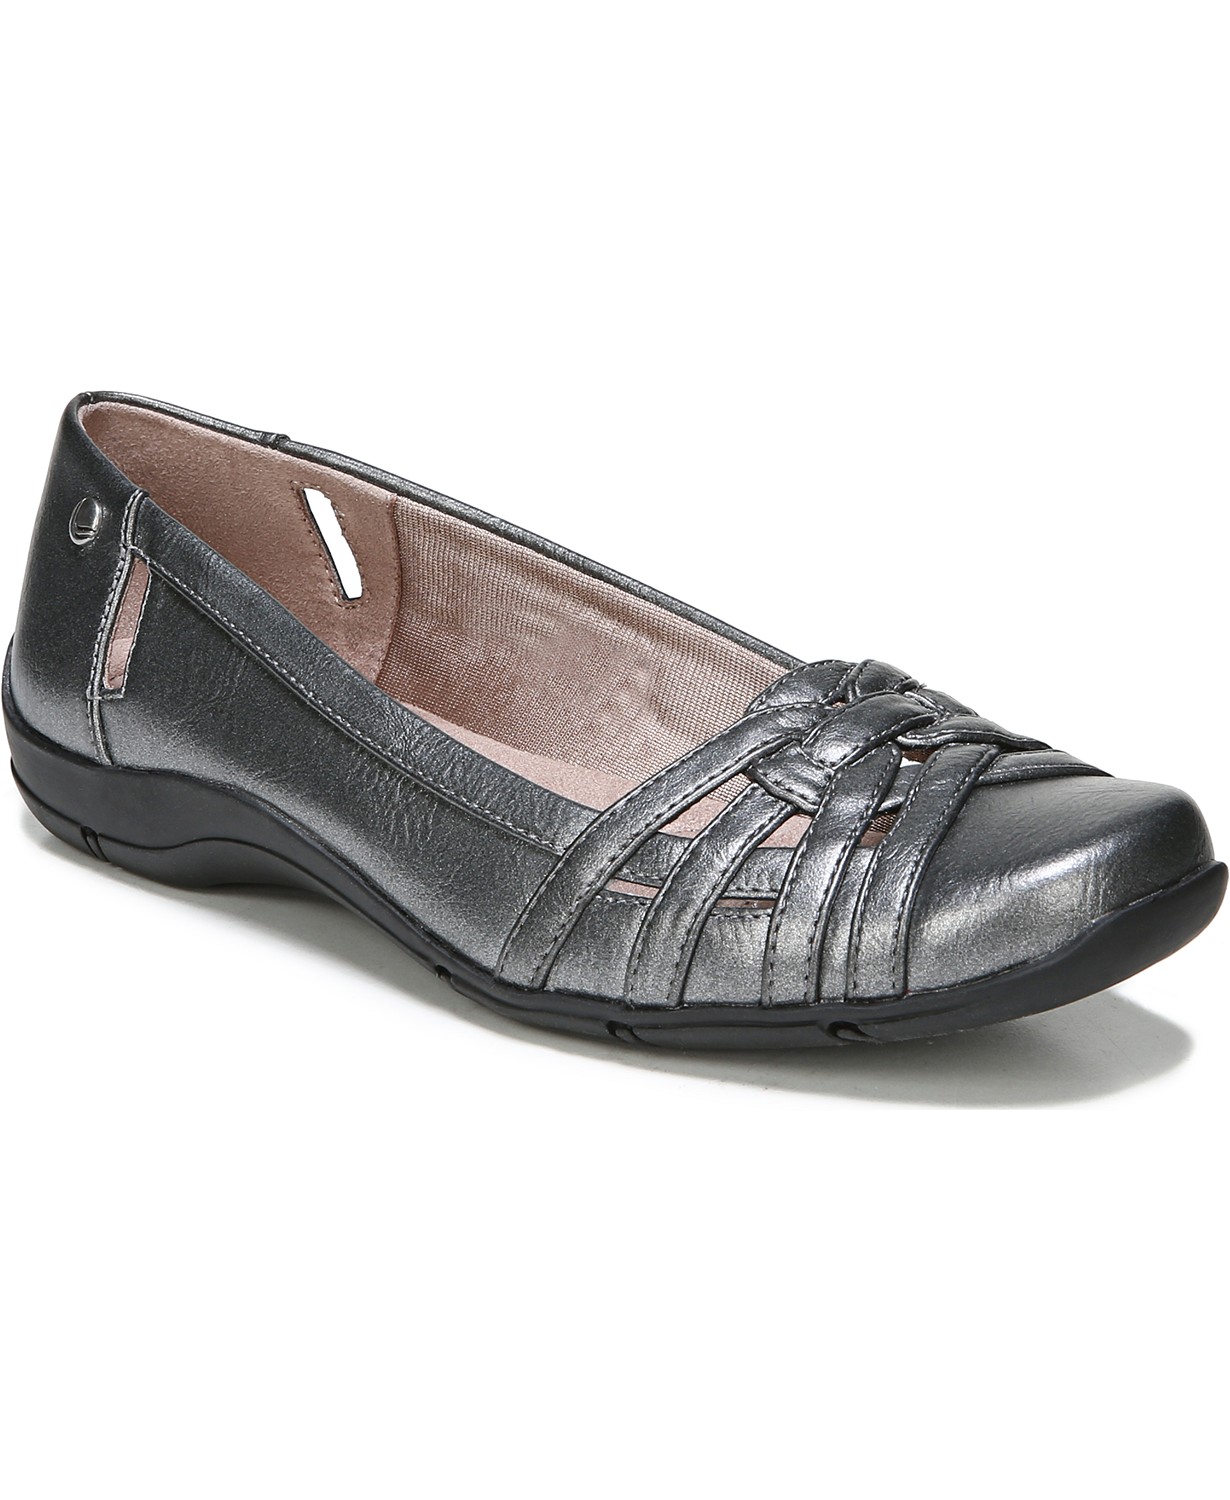 www.couturepoint.com-lifestride-womens-black-zee-slip-on-loafer-shoes-copy